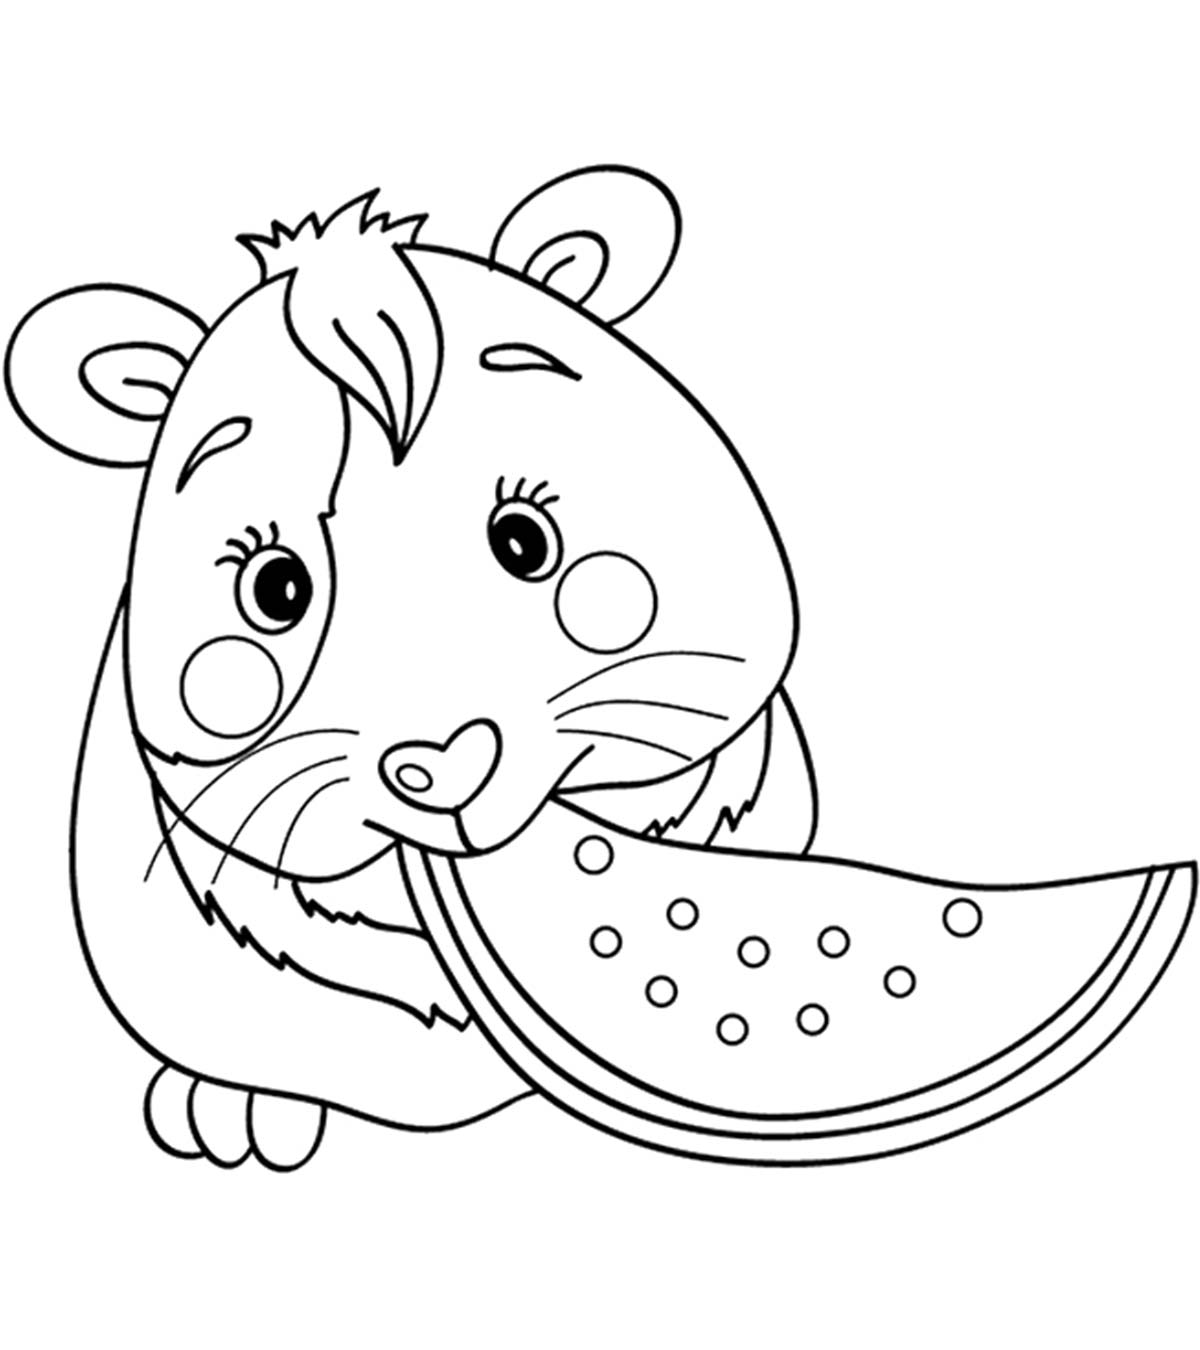 Top 25 Guinea Pig Coloring Pages For Your Toddlers